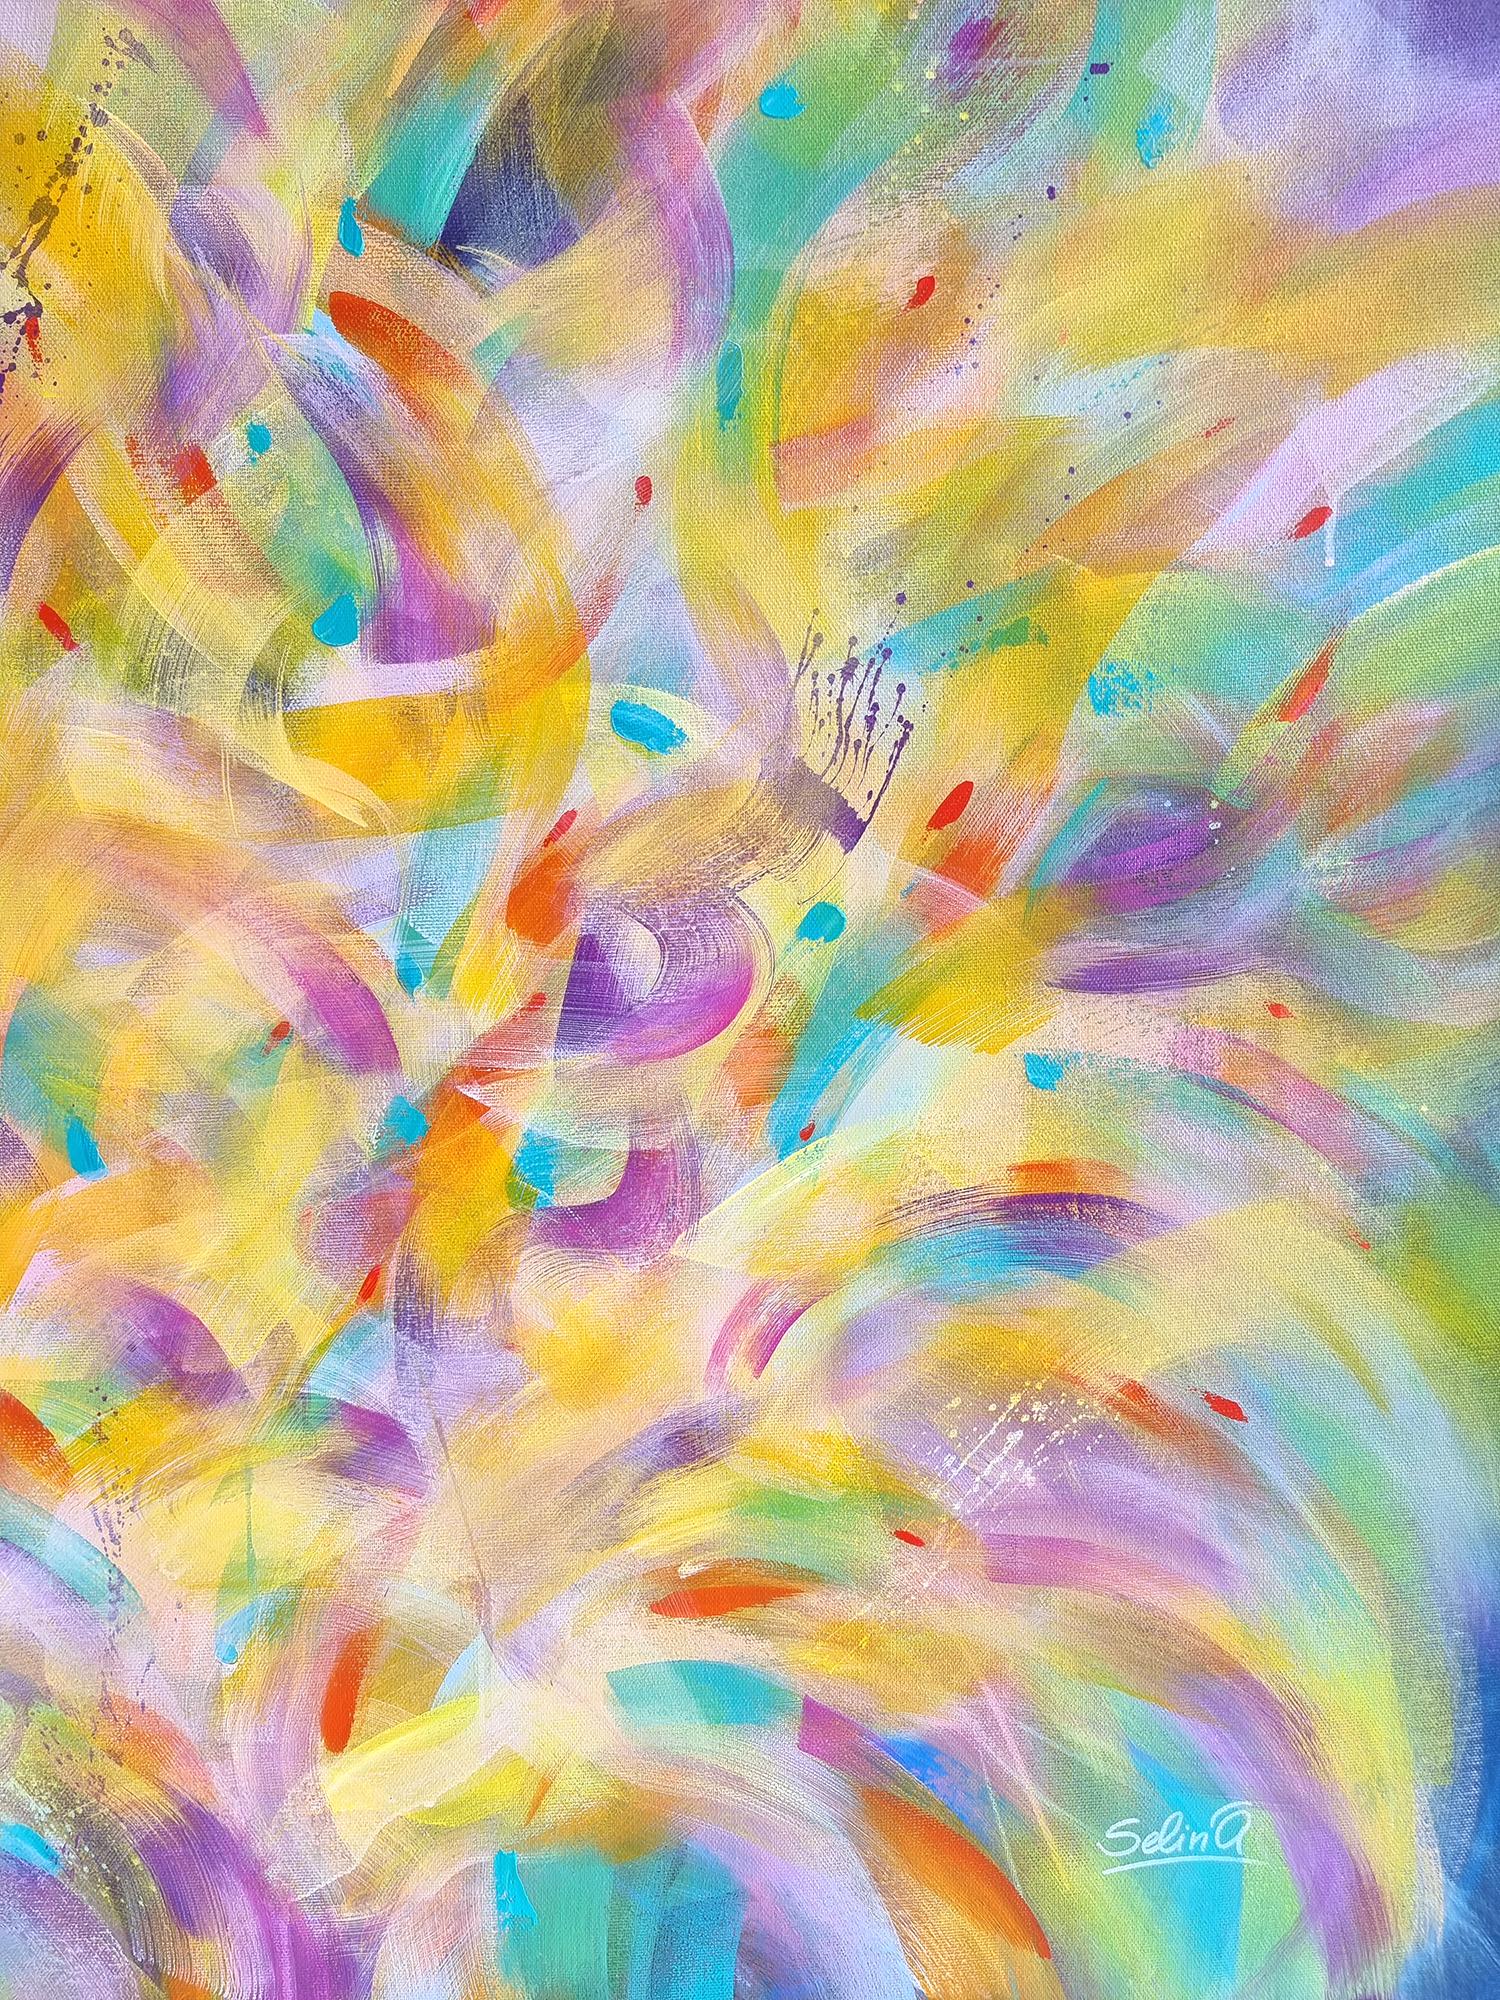 Spring light, Modern Colorful Abstract Painting 100x100cm by Anna Selina 4